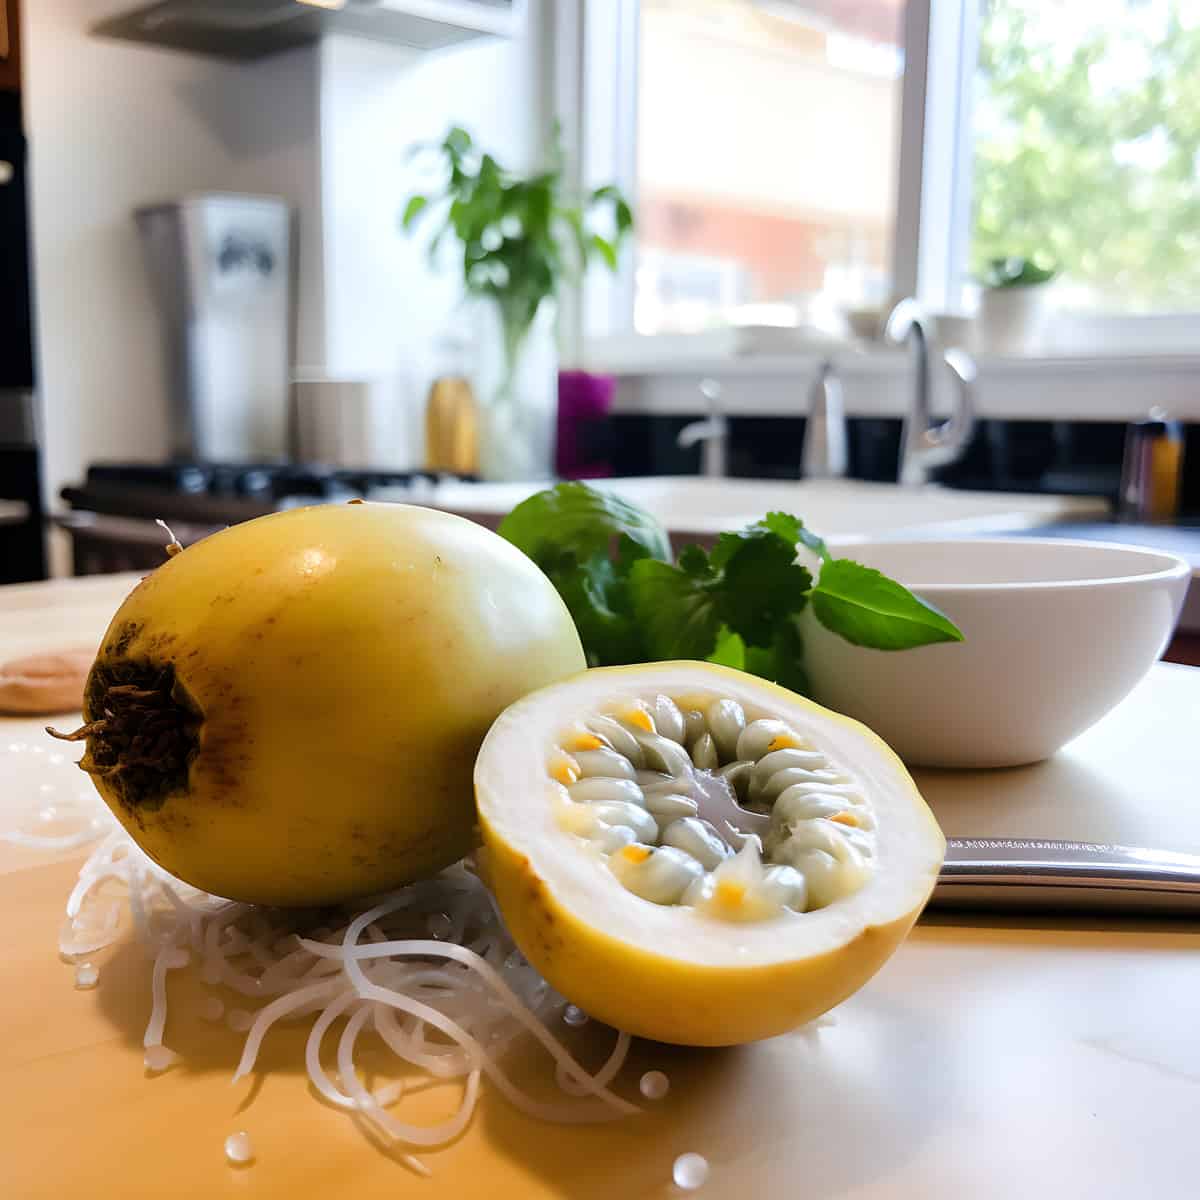 White Passionfruit on a kitchen counter